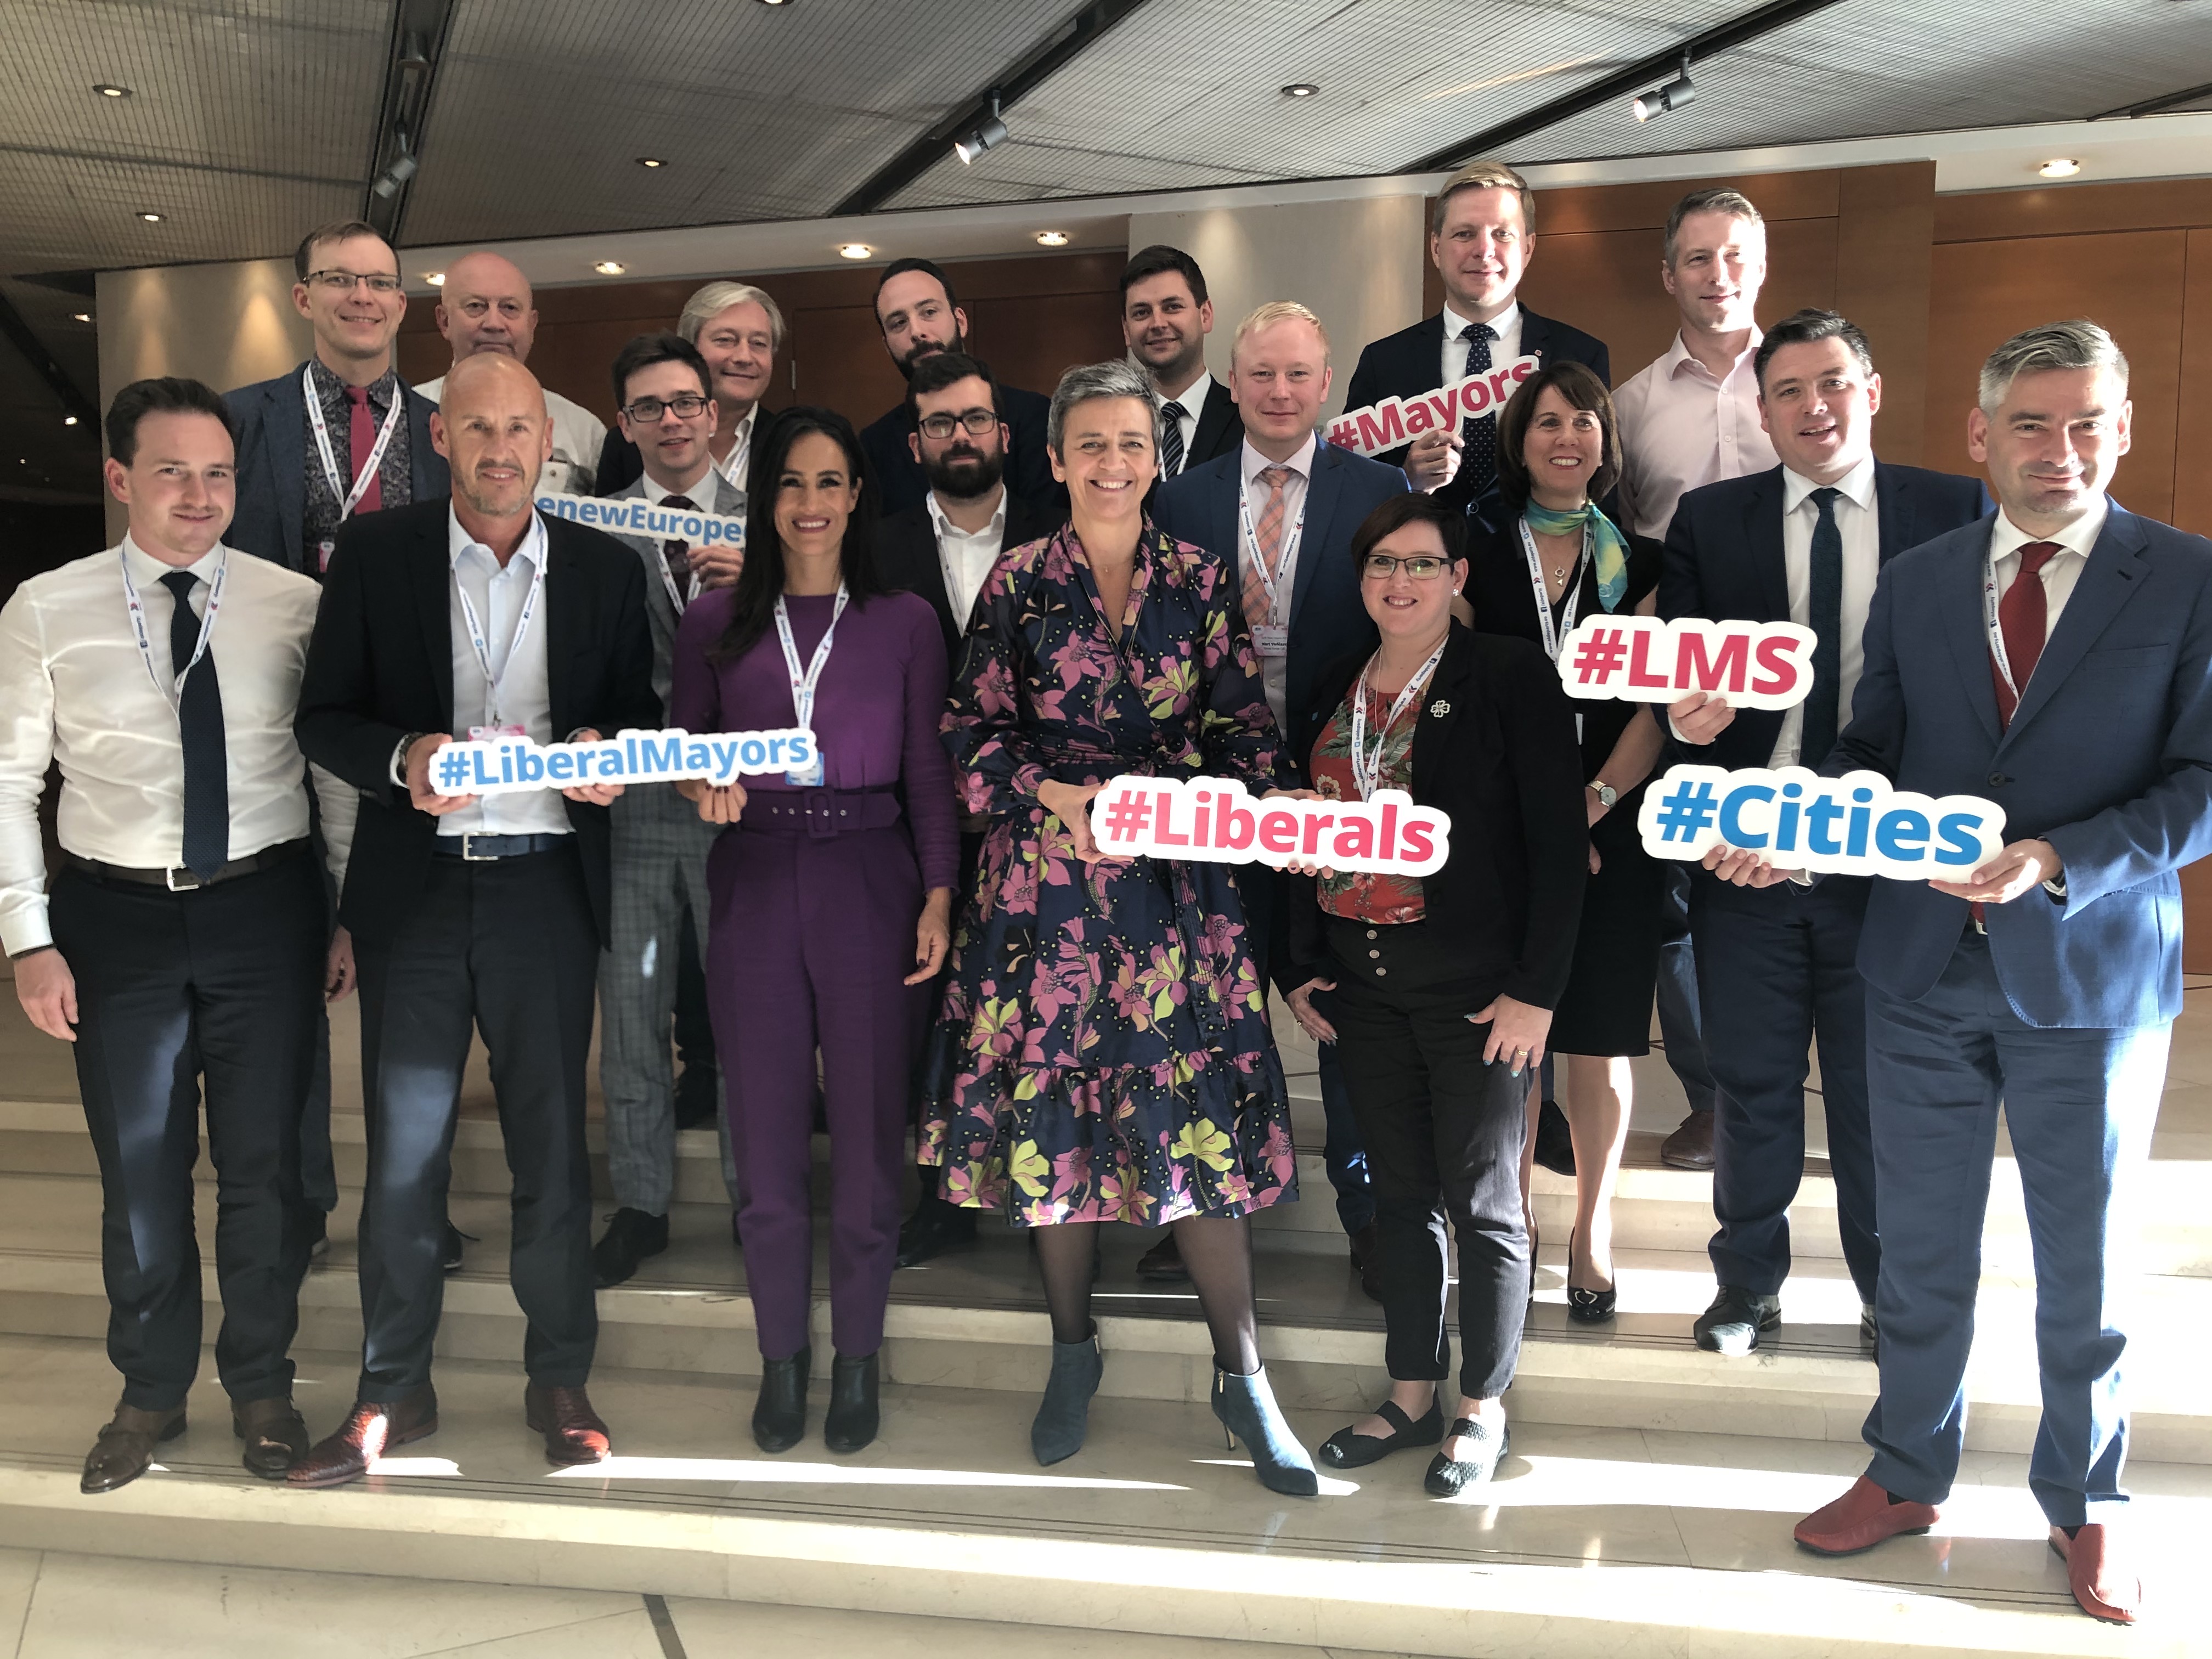 Margrethe Vestager at the Liberal Mayors Summit – Mayors discuss future of mobility